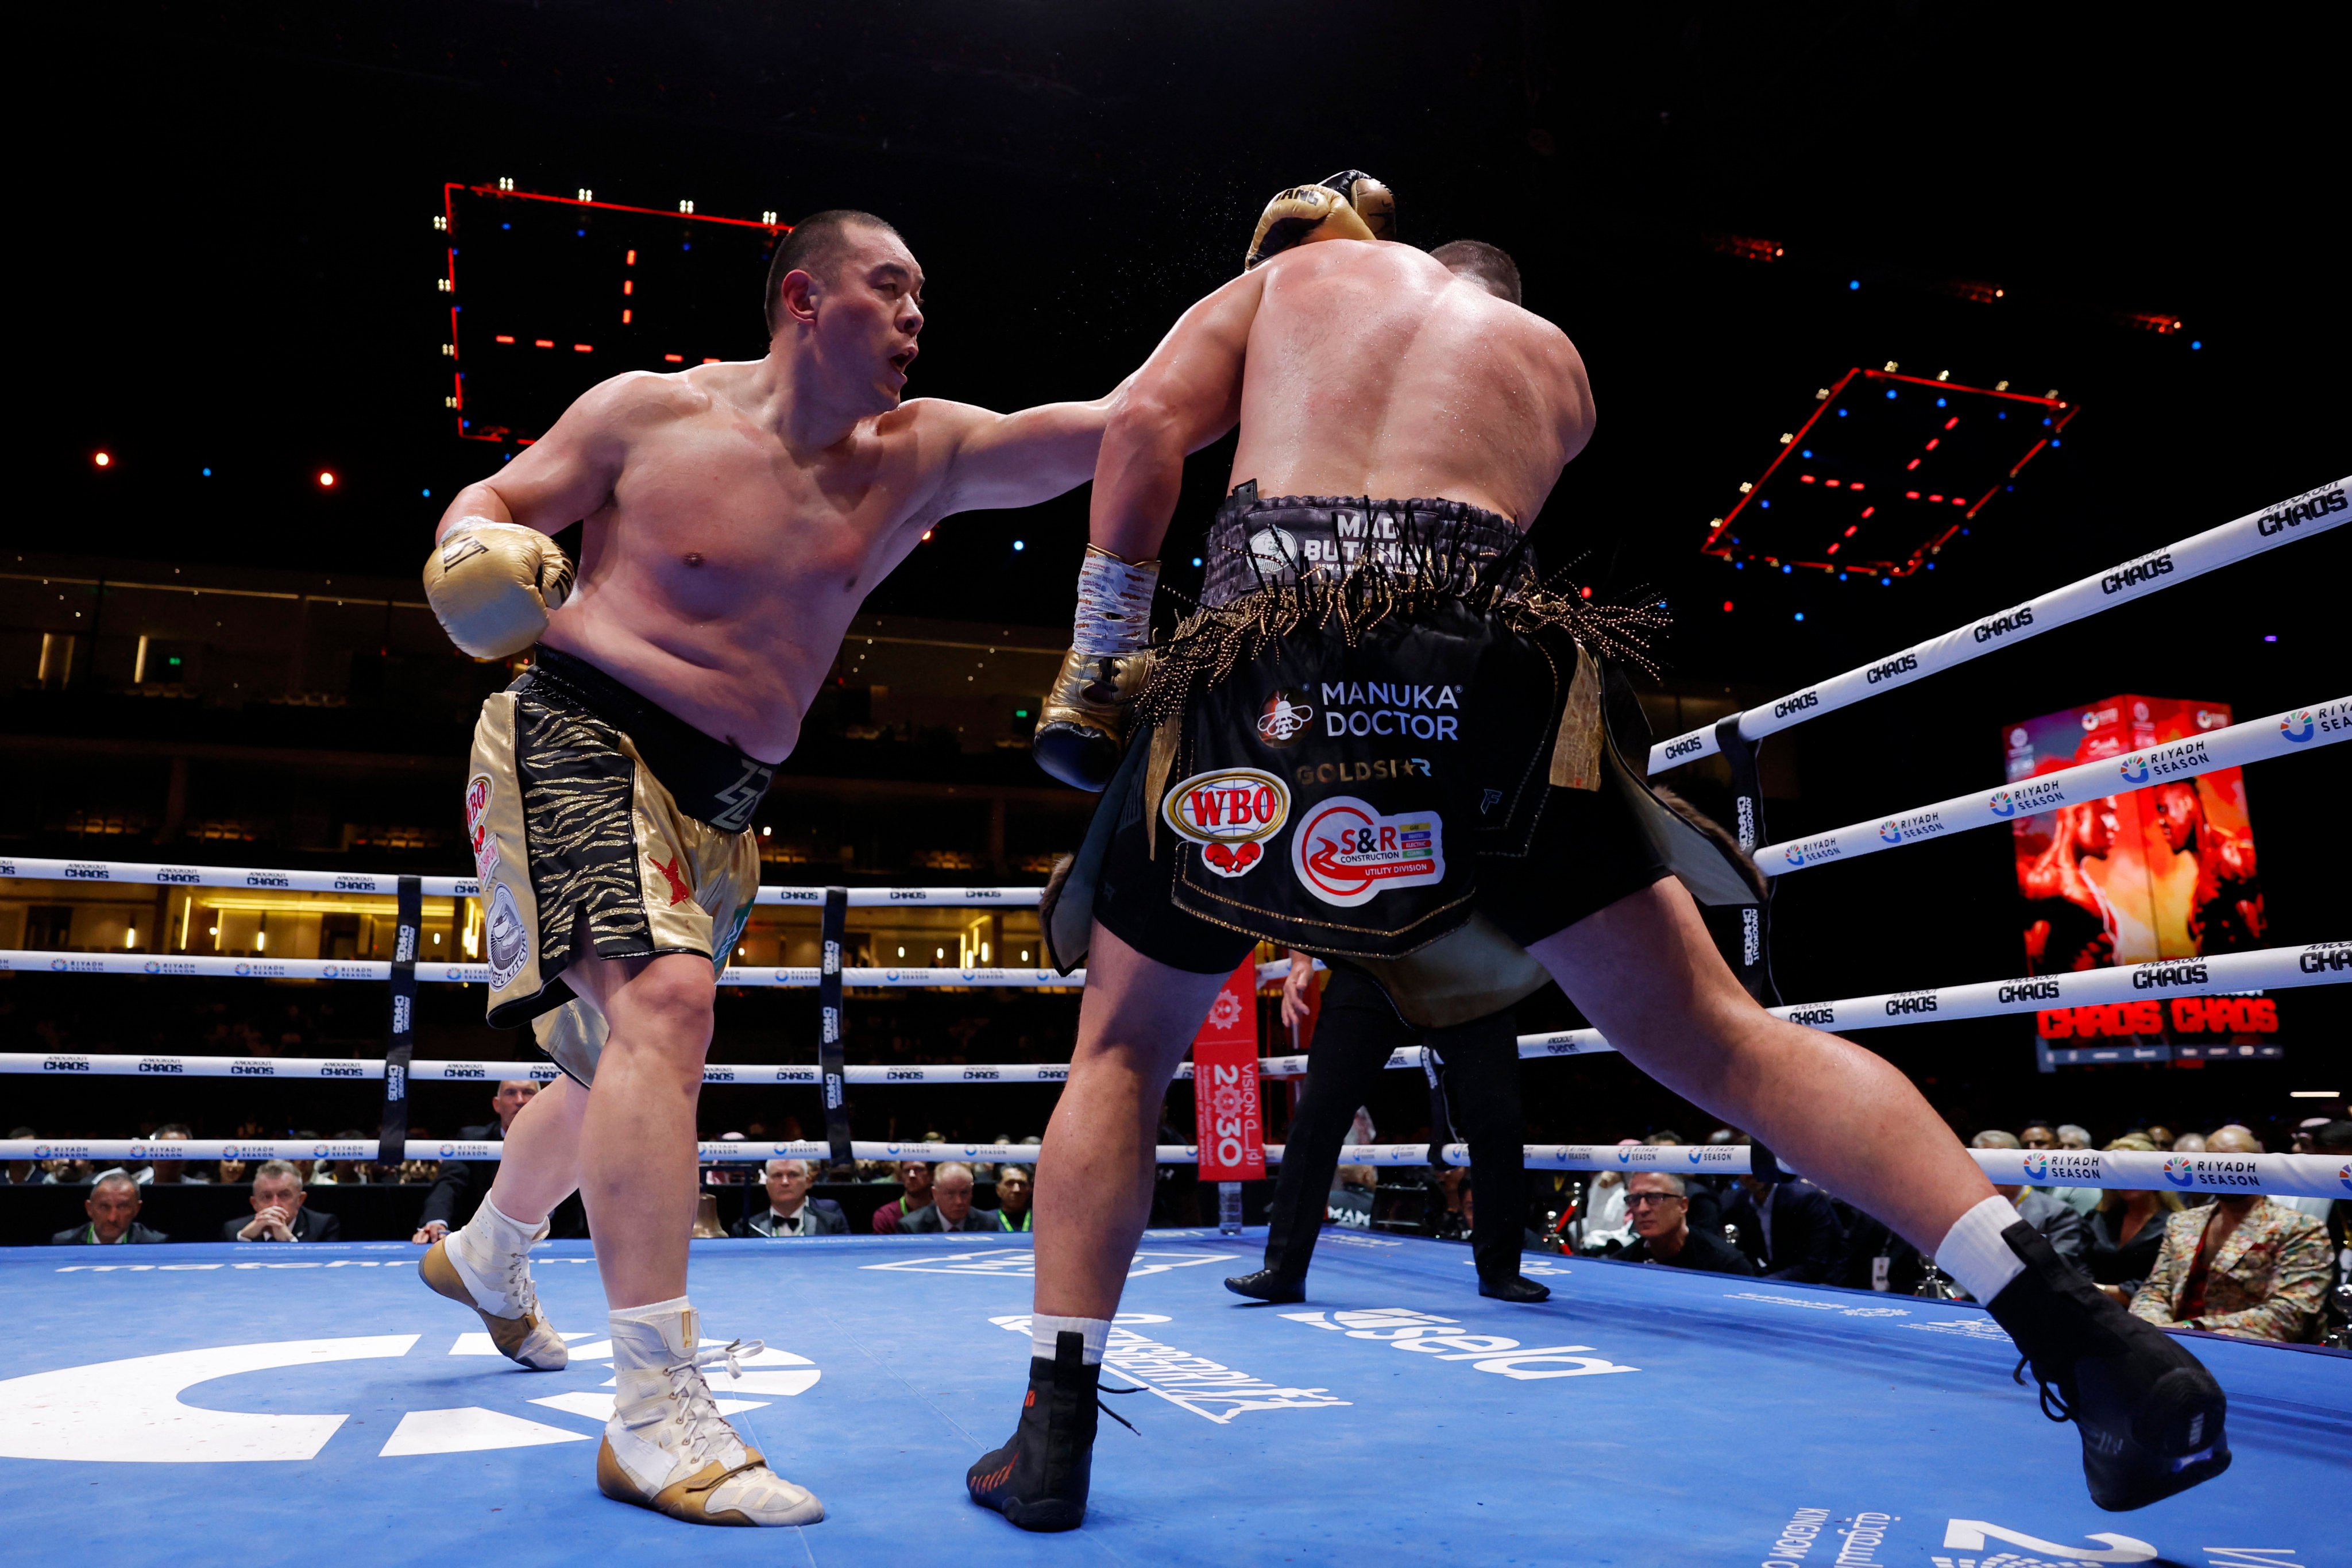 Zhang Zhilei lands a punch on Joseph Parker at the Kingdom Arena. Photo: Reuters